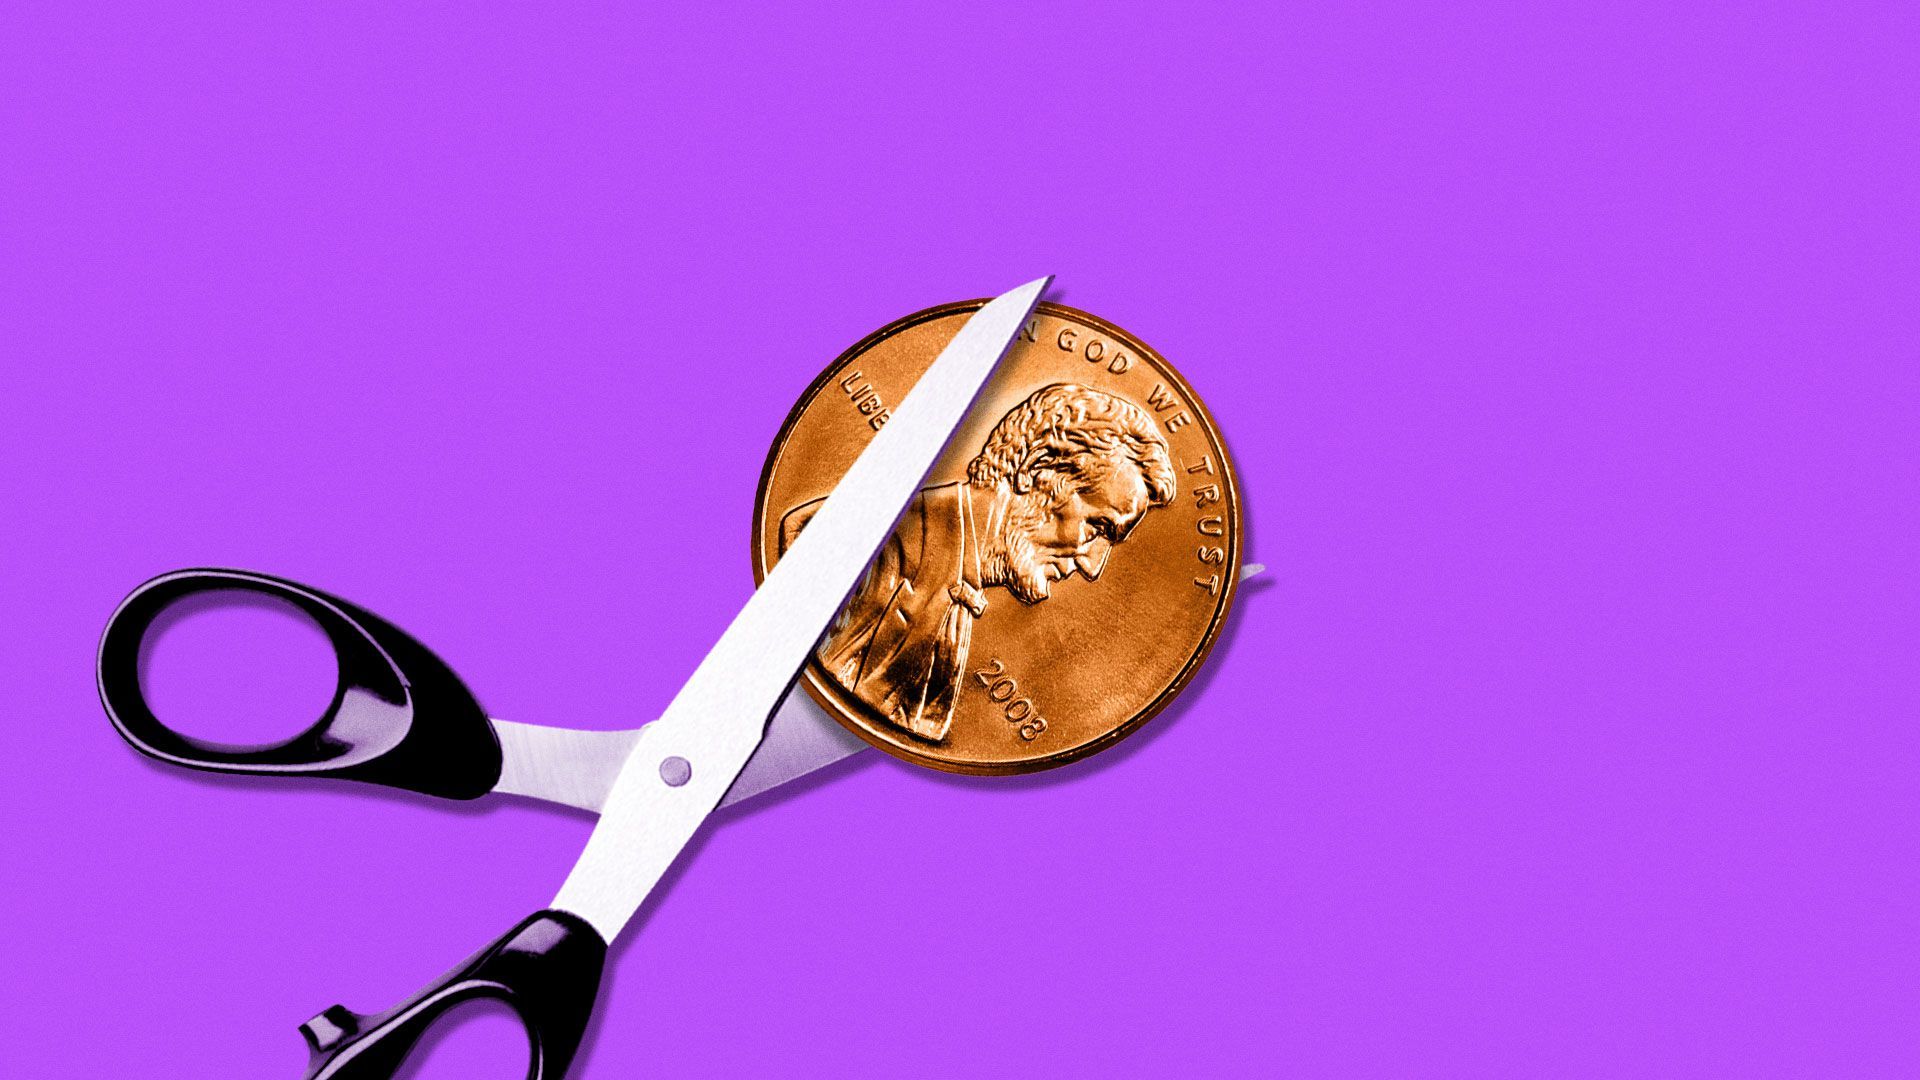 Illustration of scissors trying to cut a penny